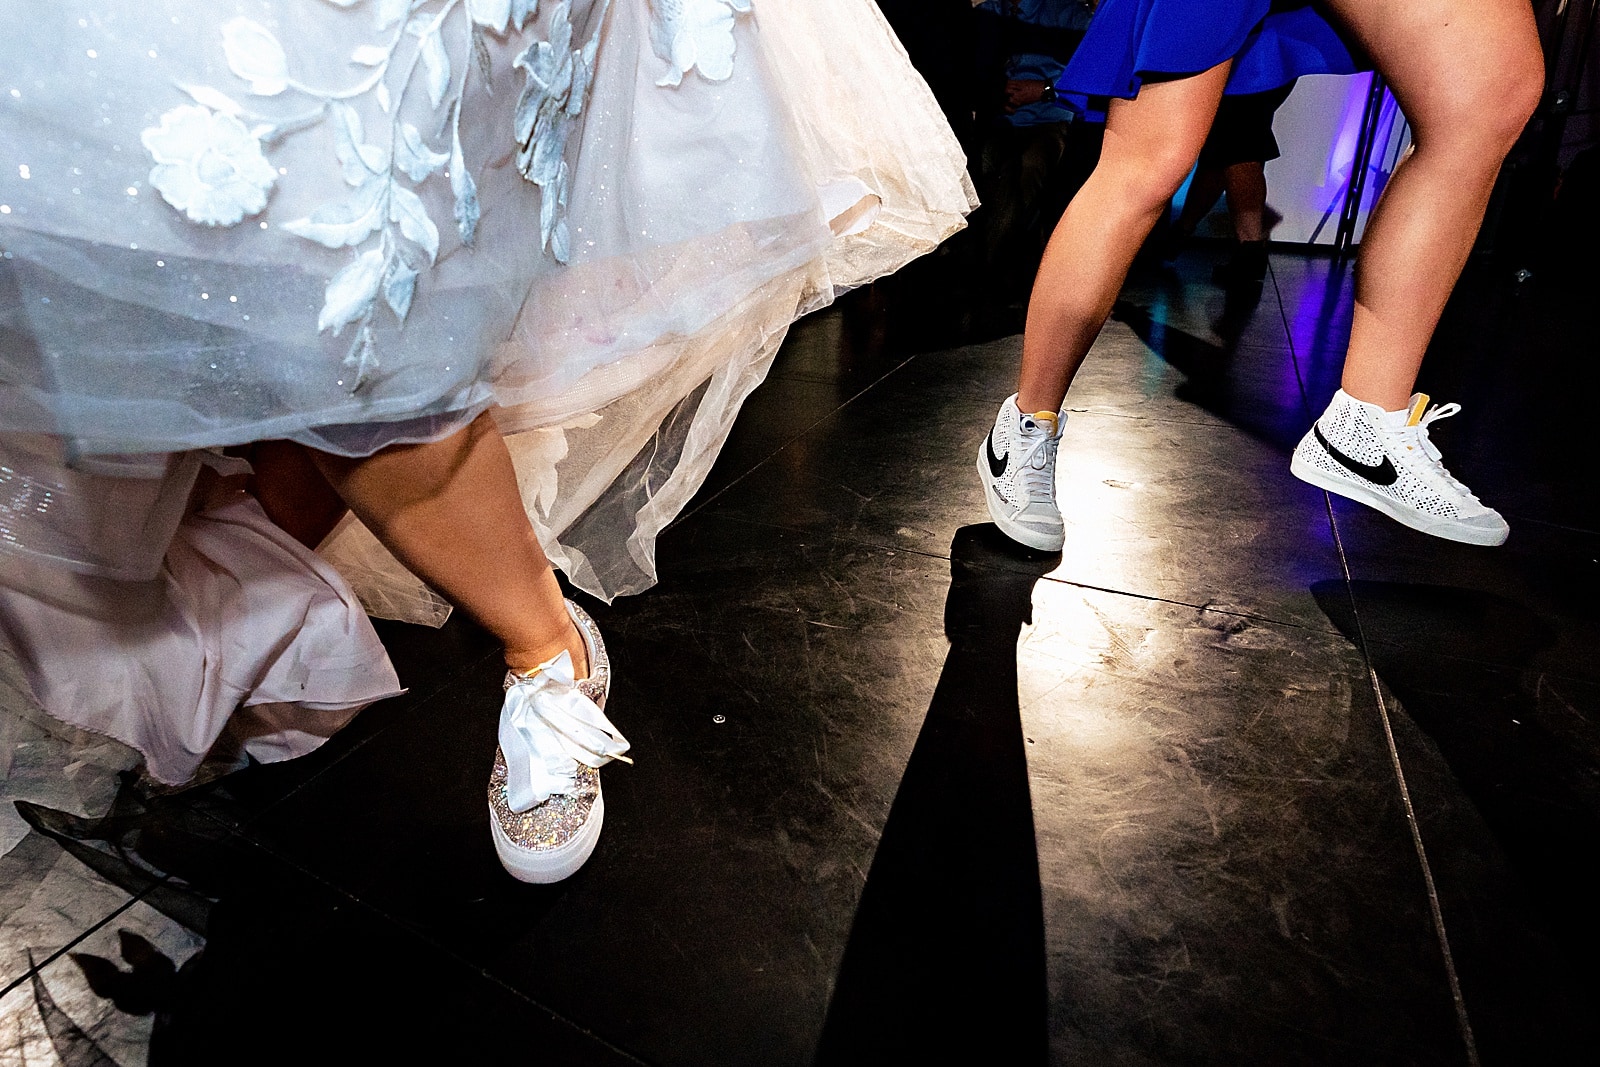 make sure you bring some flats for dancing all night at your wedding!